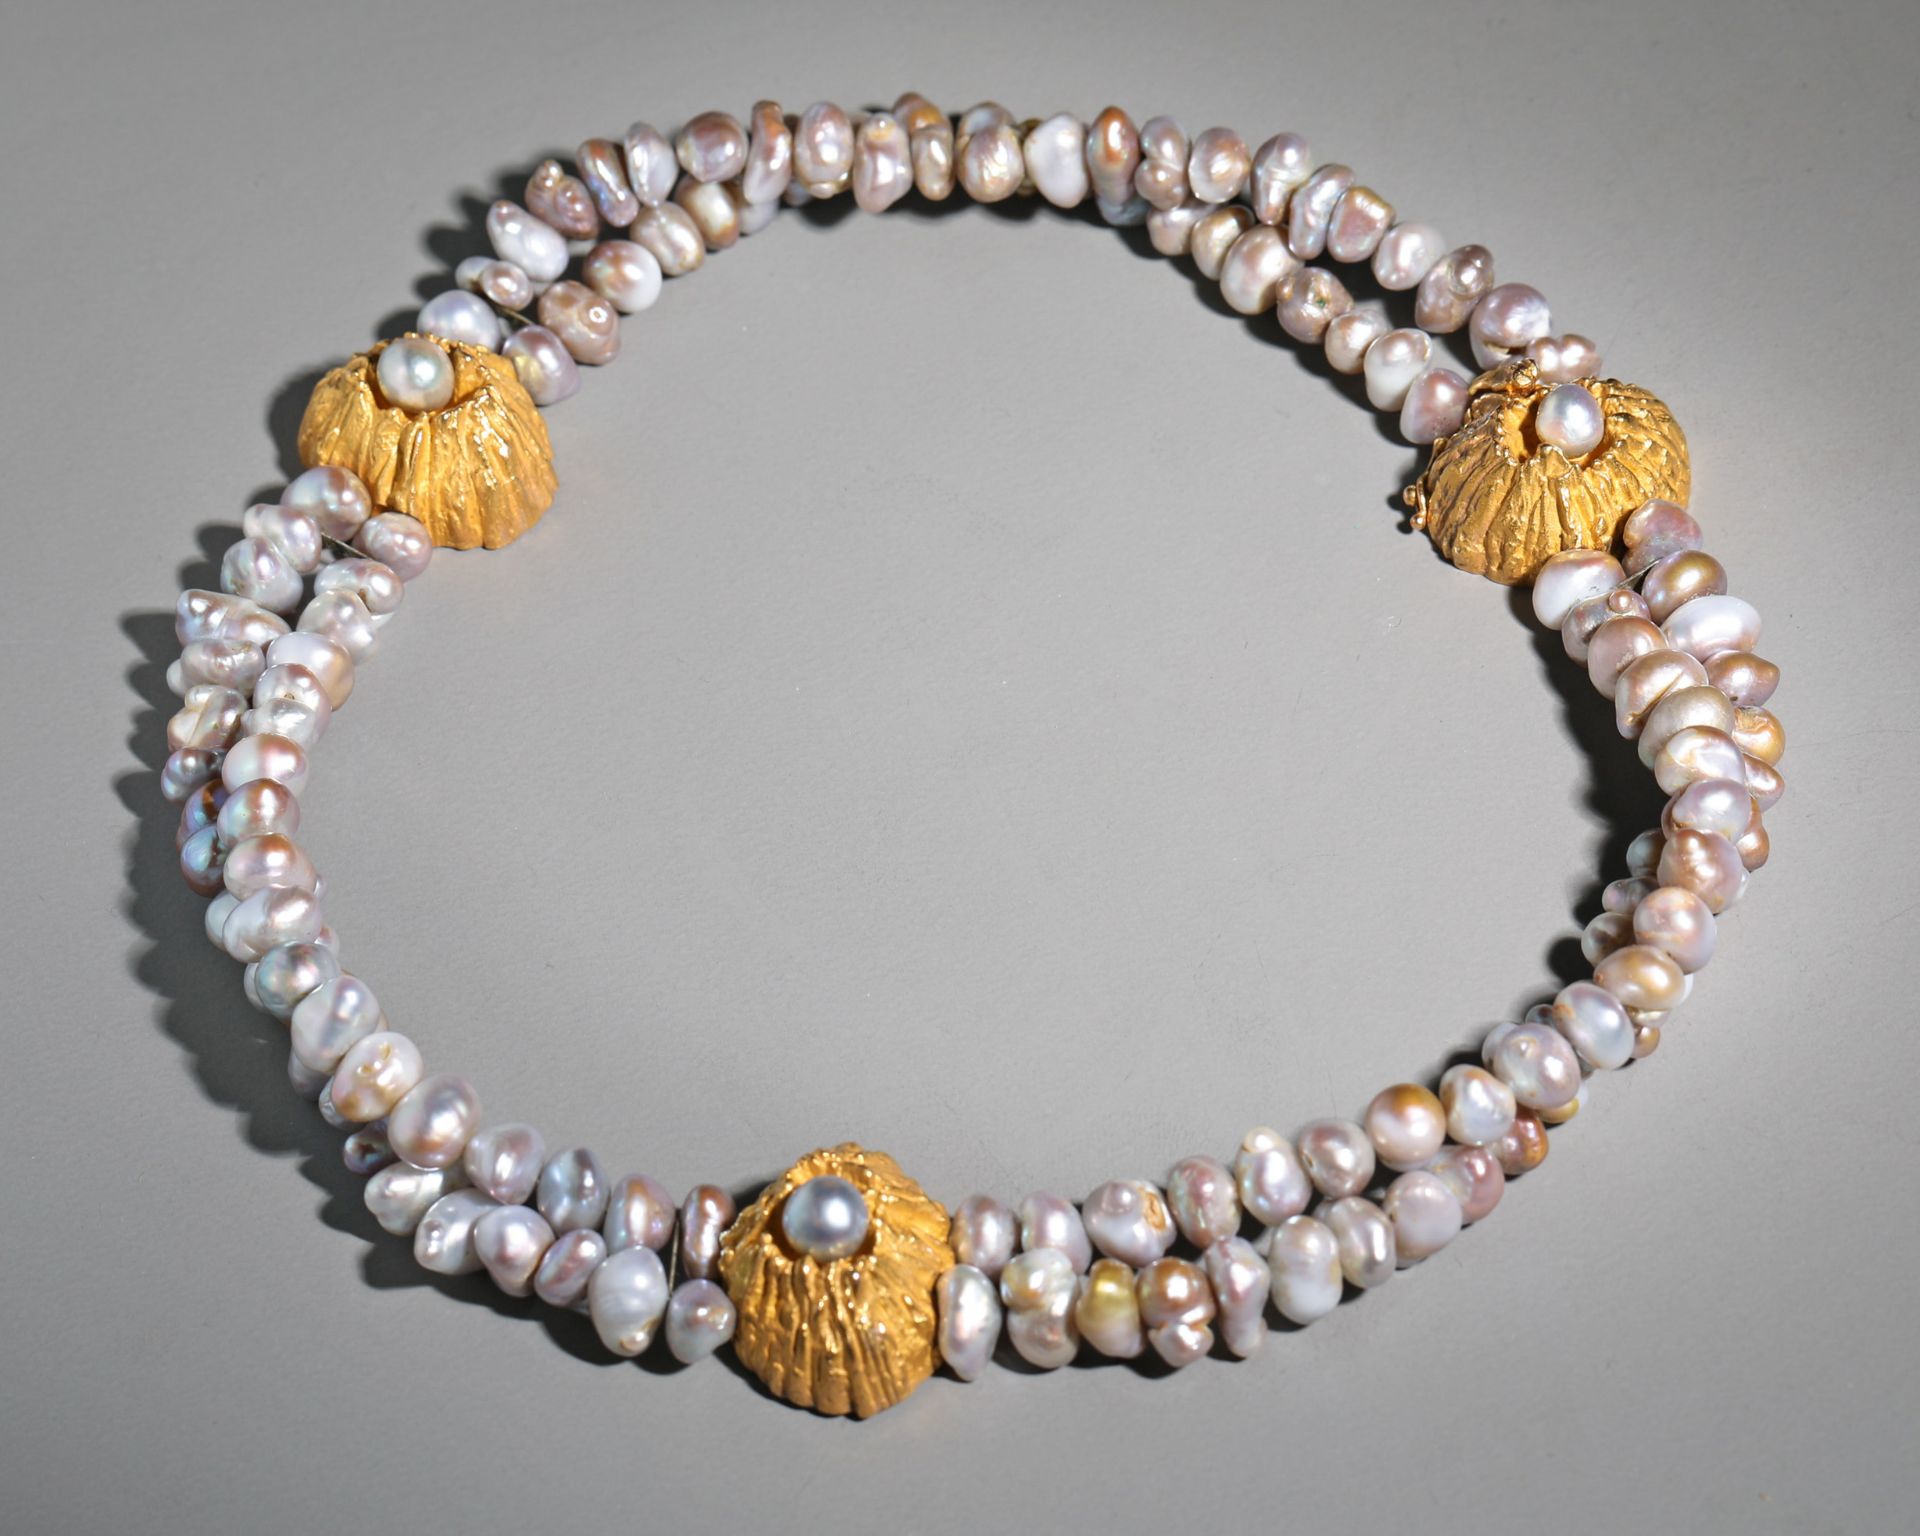 Ebbe Weiss-Weingart, Necklace with three volcanoes - Image 3 of 6